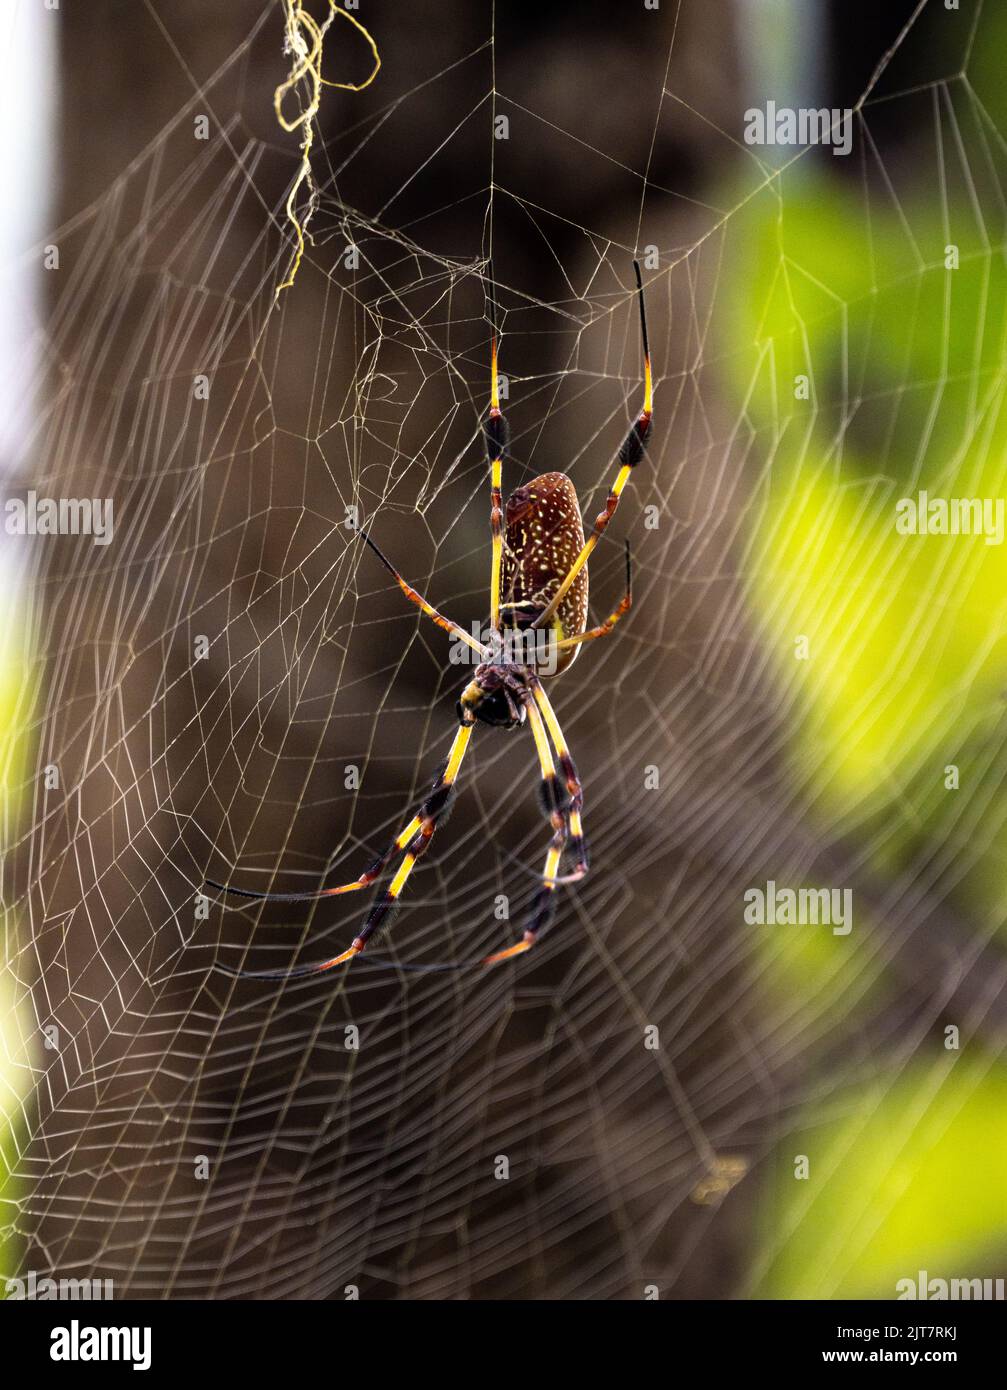 A close up of a Joro Spider an invasive species spreading to Georgia and South Carolina Stock Photo